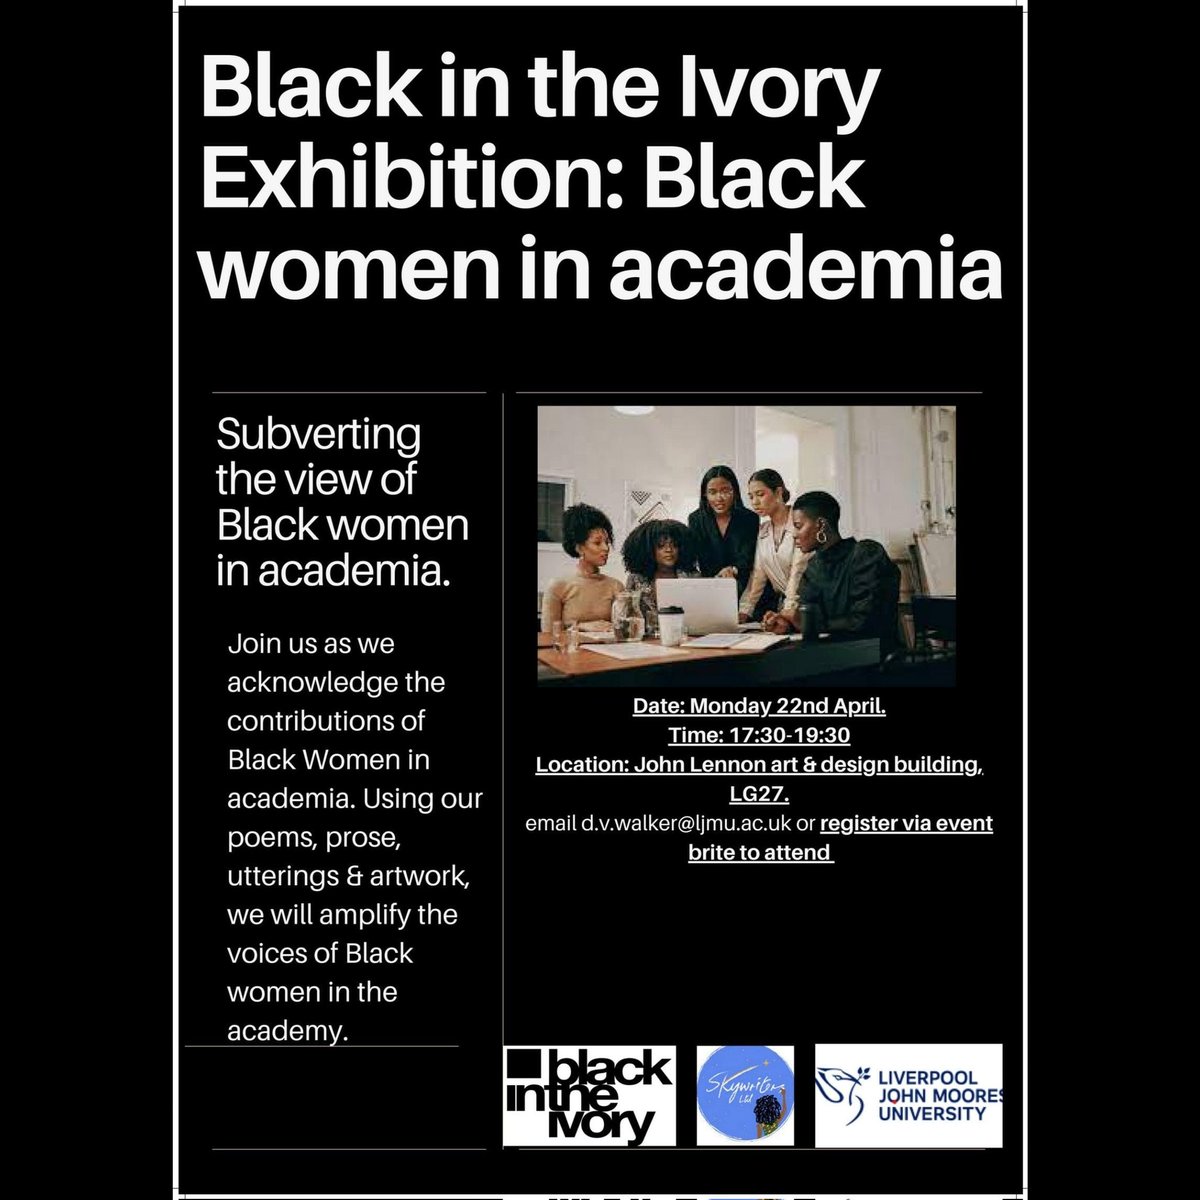 The Black in the Ivory Exhibition launch is today! 🙌🏿 We're so excited! A year of hard work with some amazing Black women academics telling their stories through creative means! In partnership with @LJMU and led by the fabulous @niquevwalk 🙌🏿